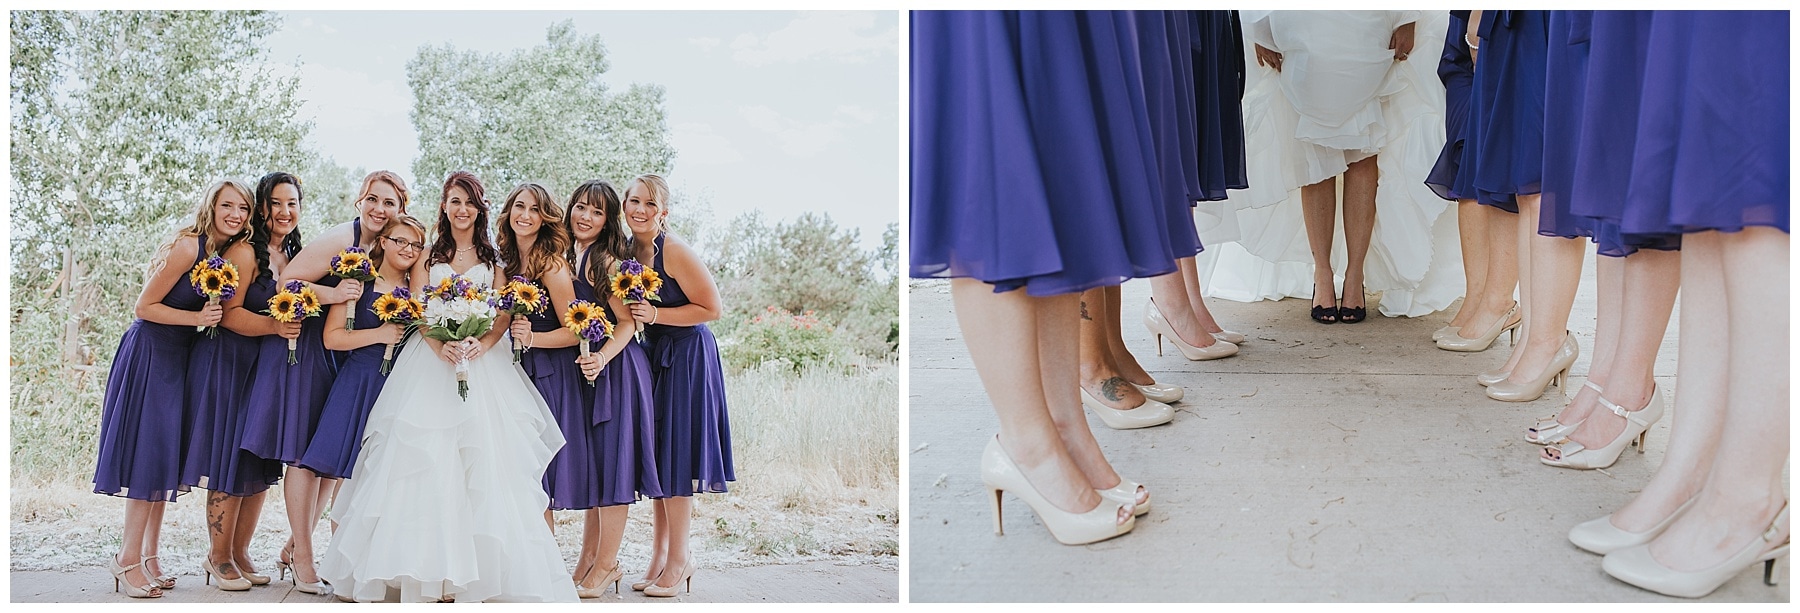 The Pines at Genesee colorado mountain wedding photography